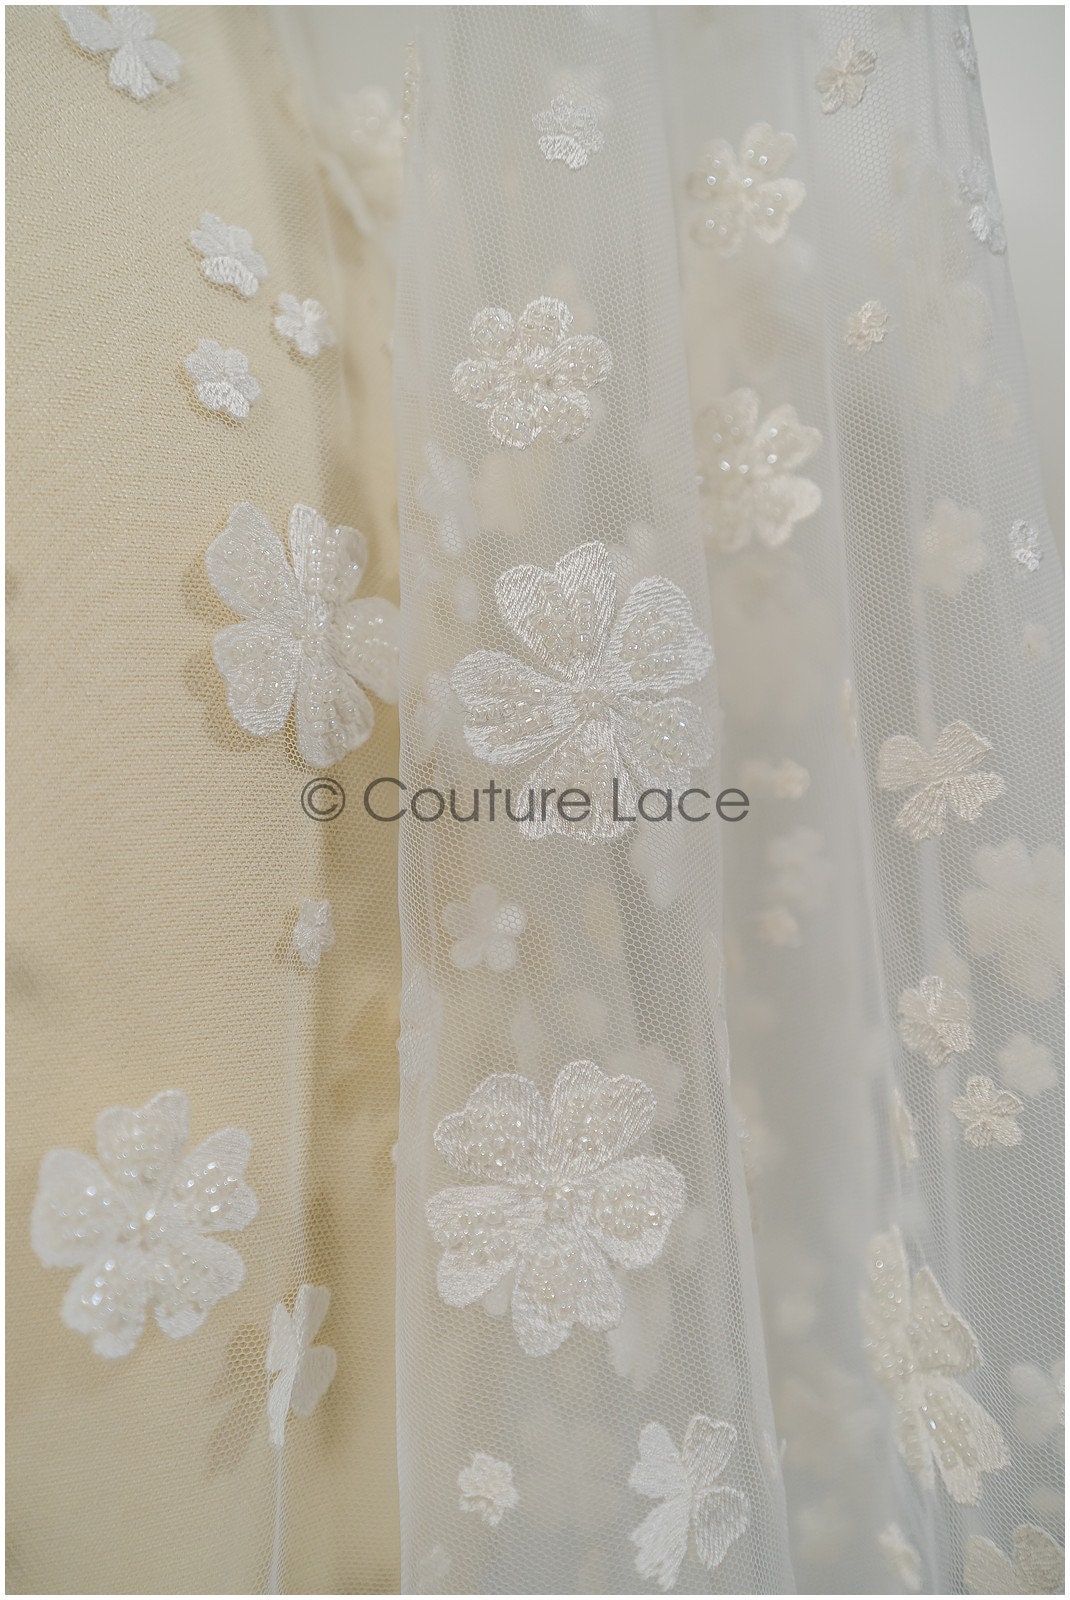 beaded floral lace fabric all over flower lace L21-126 // Beaded bridal lace fabric with flowers bridal flower lace with small flowers